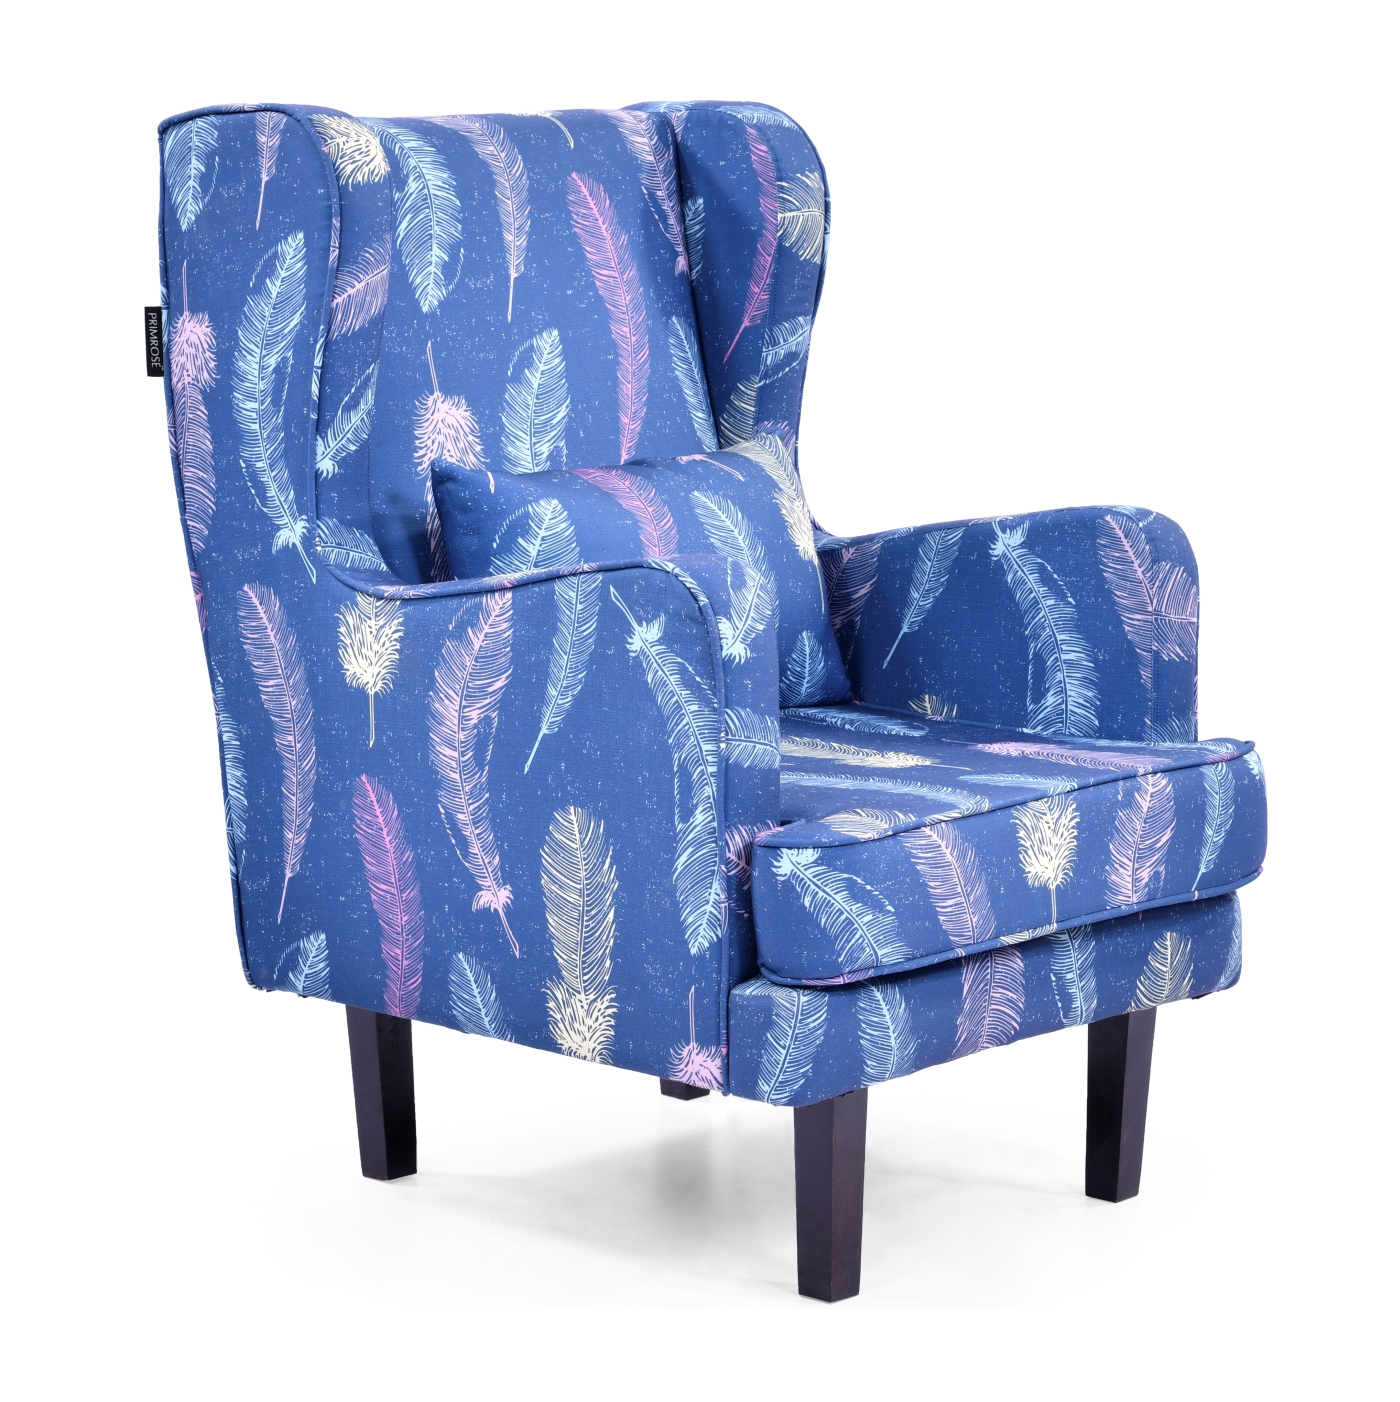 PRIMROSE Dream Feature Digital Printed Faux Linen Fabric High Back Wing Chair - Blue  